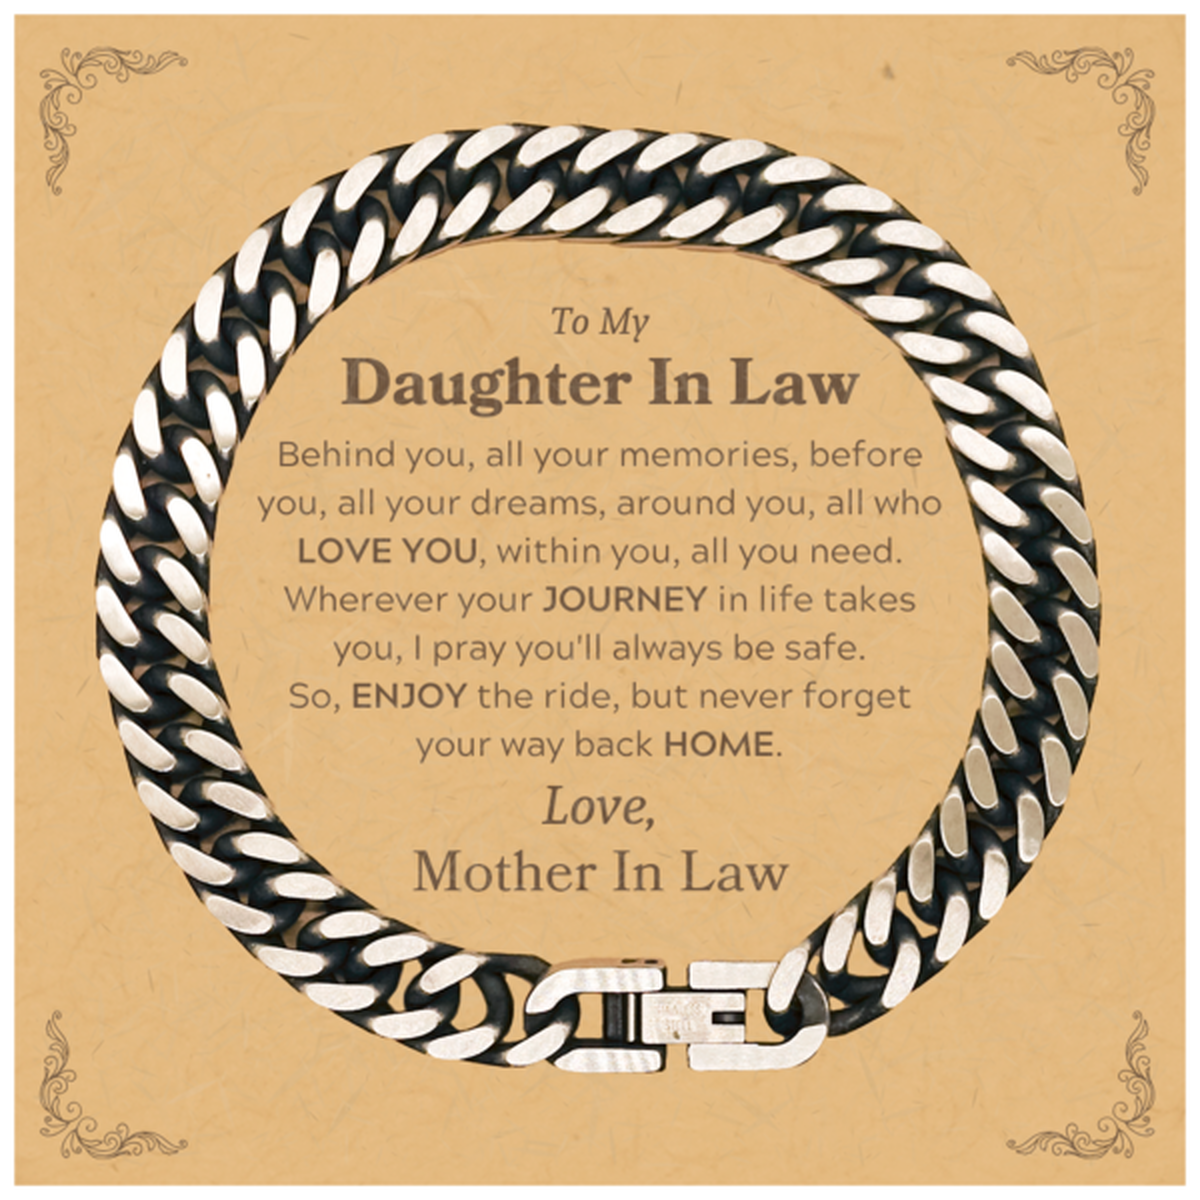 To My Daughter In Law Graduation Gifts from Mother In Law, Daughter In Law Cuban Link Chain Bracelet Christmas Birthday Gifts for Daughter In Law Behind you, all your memories, before you, all your dreams. Love, Mother In Law